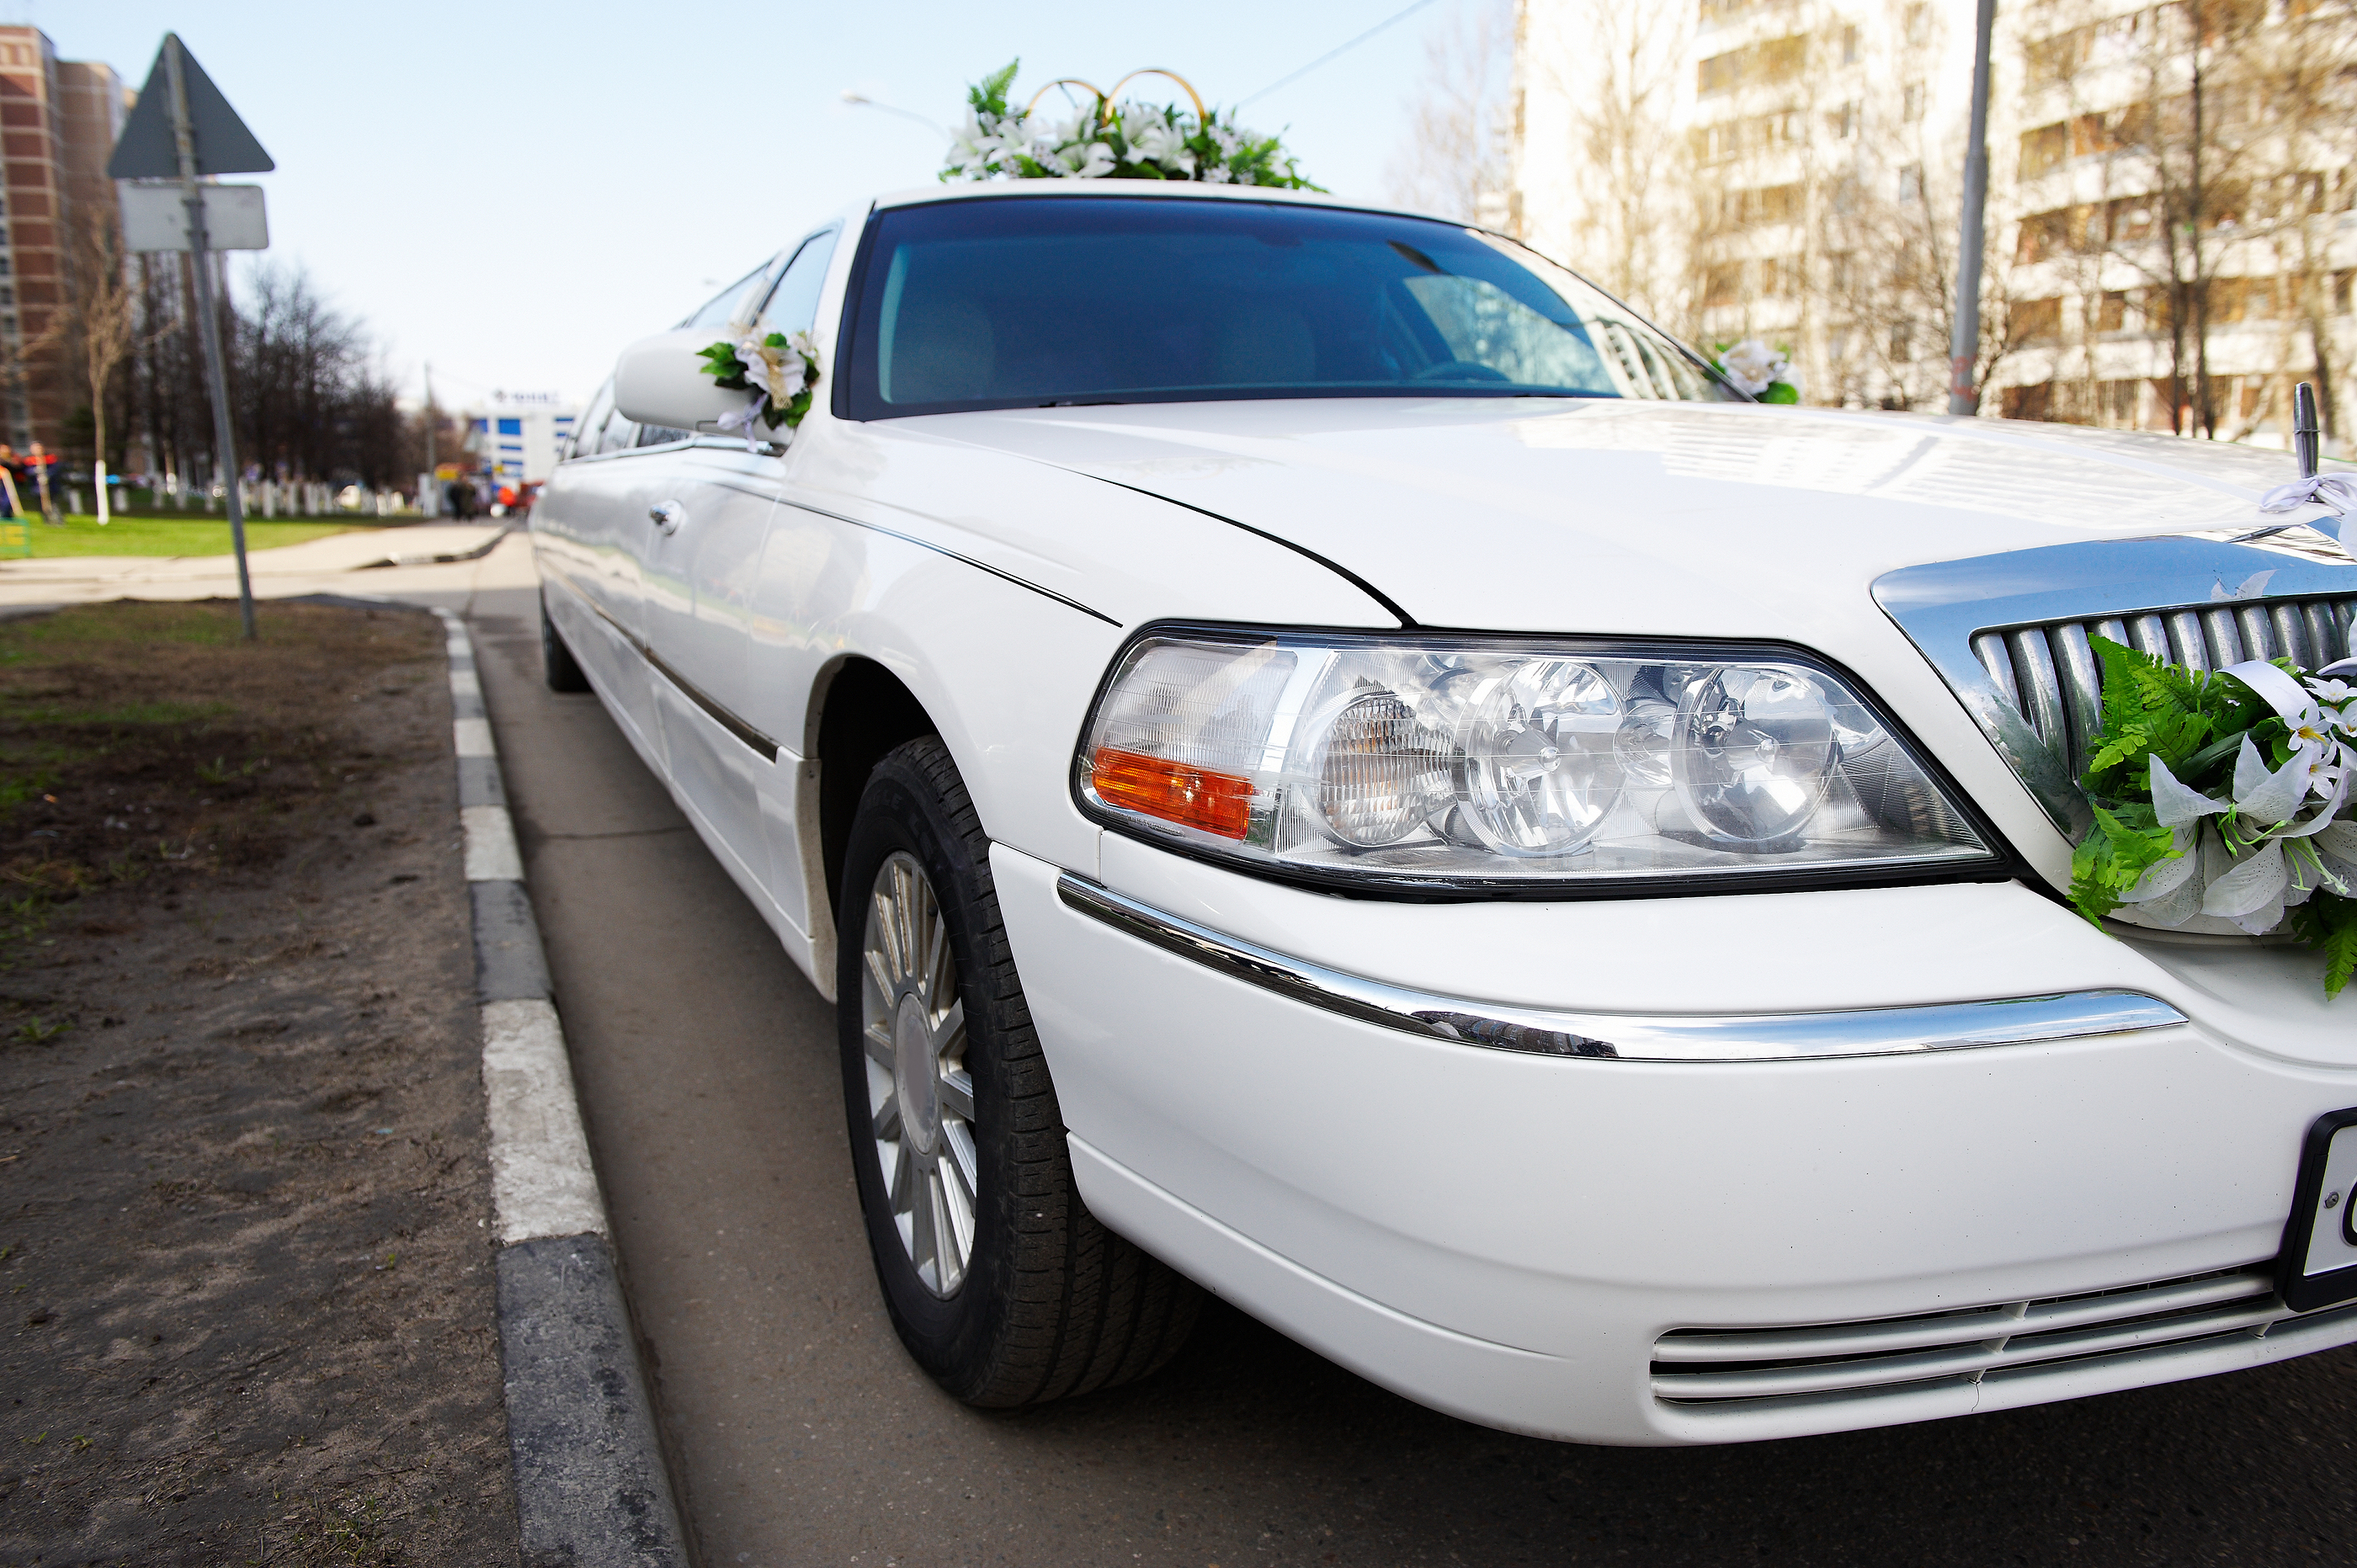 Hudson Valley Trips specializes in limo service in Orange County NY